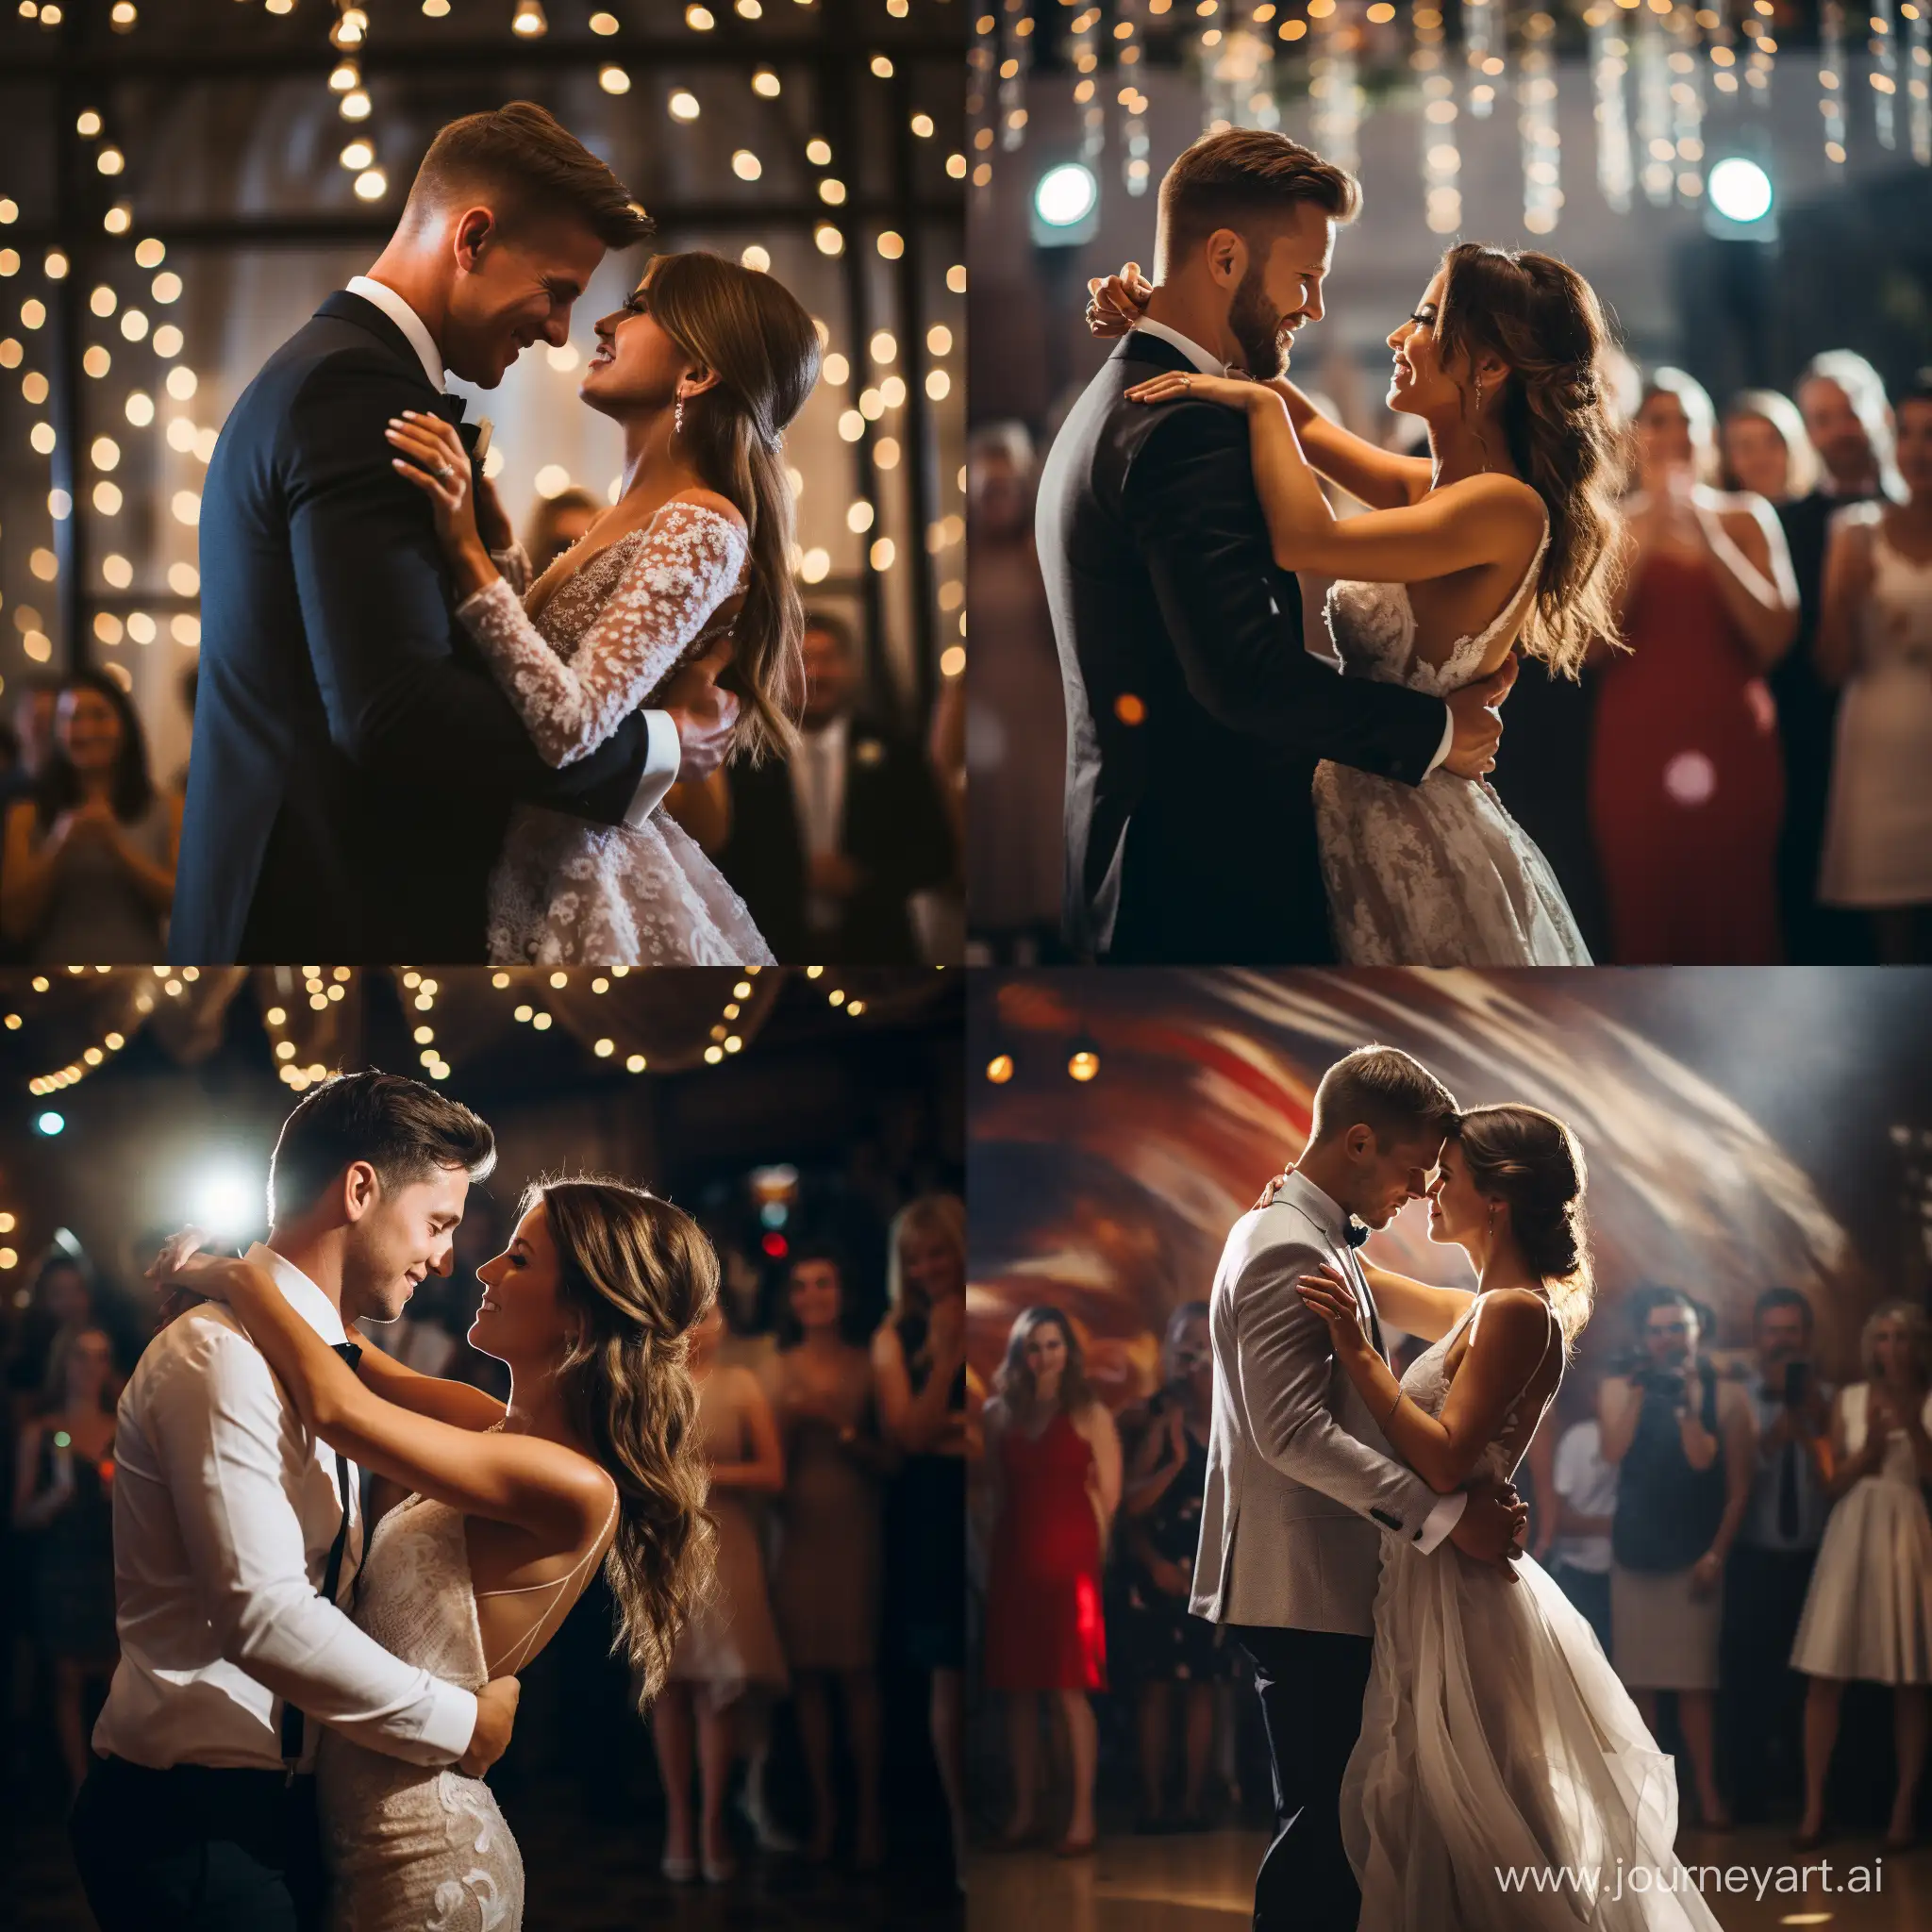 Captivating-First-Dance-of-Newlyweds-at-Romantic-Wedding-Reception